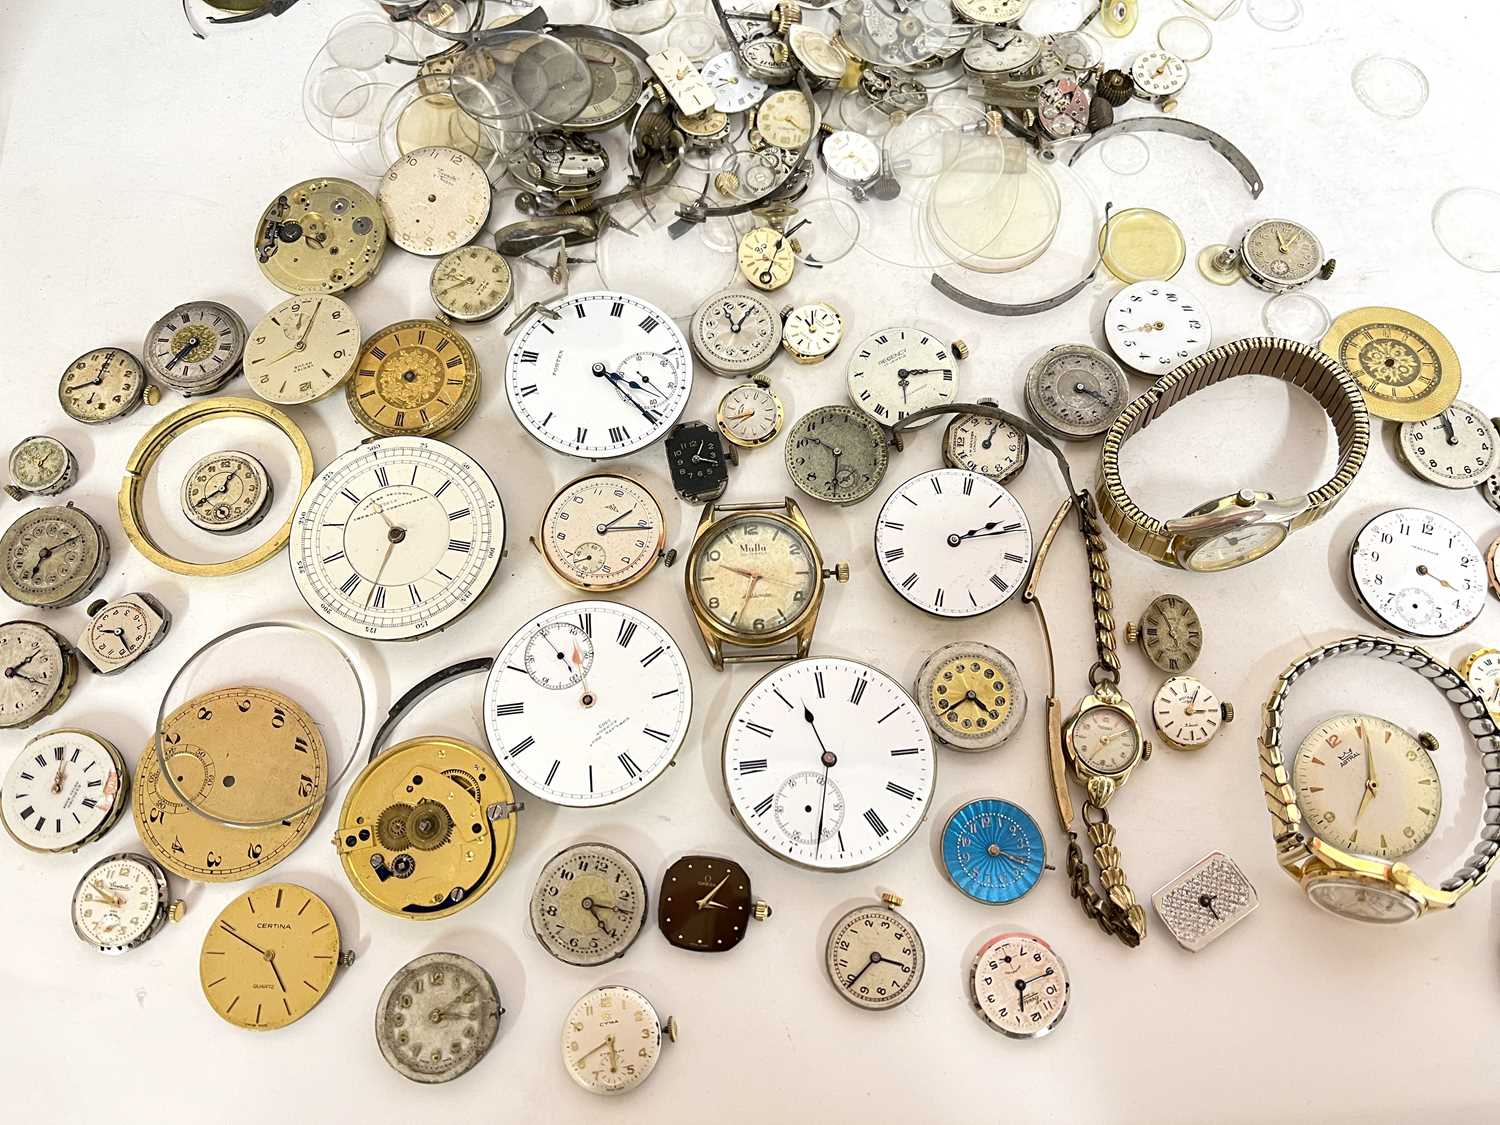 Mixed lot of three wristwatches along with wrist and pocket watch movements including a repeater - Image 2 of 2